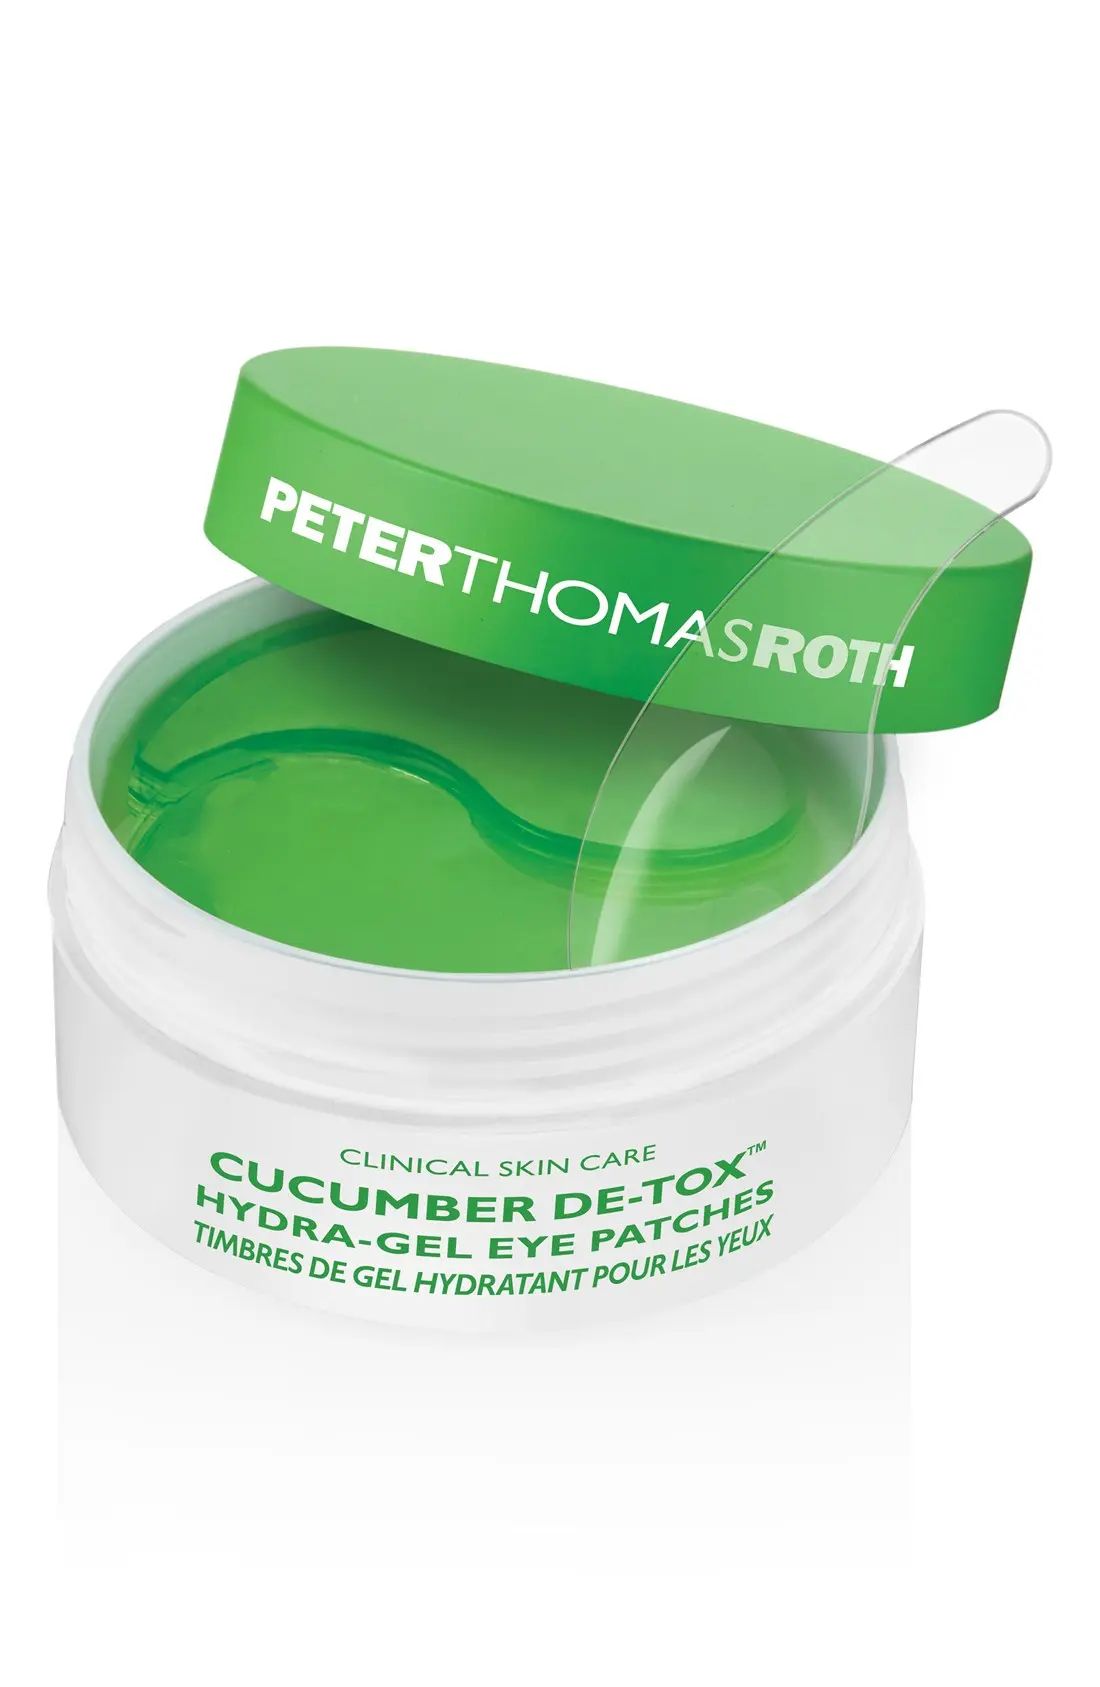 Peter Thomas Roth 'Cucumber De-Tox™' Hydra-Gel Eye Patches | Nordstrom